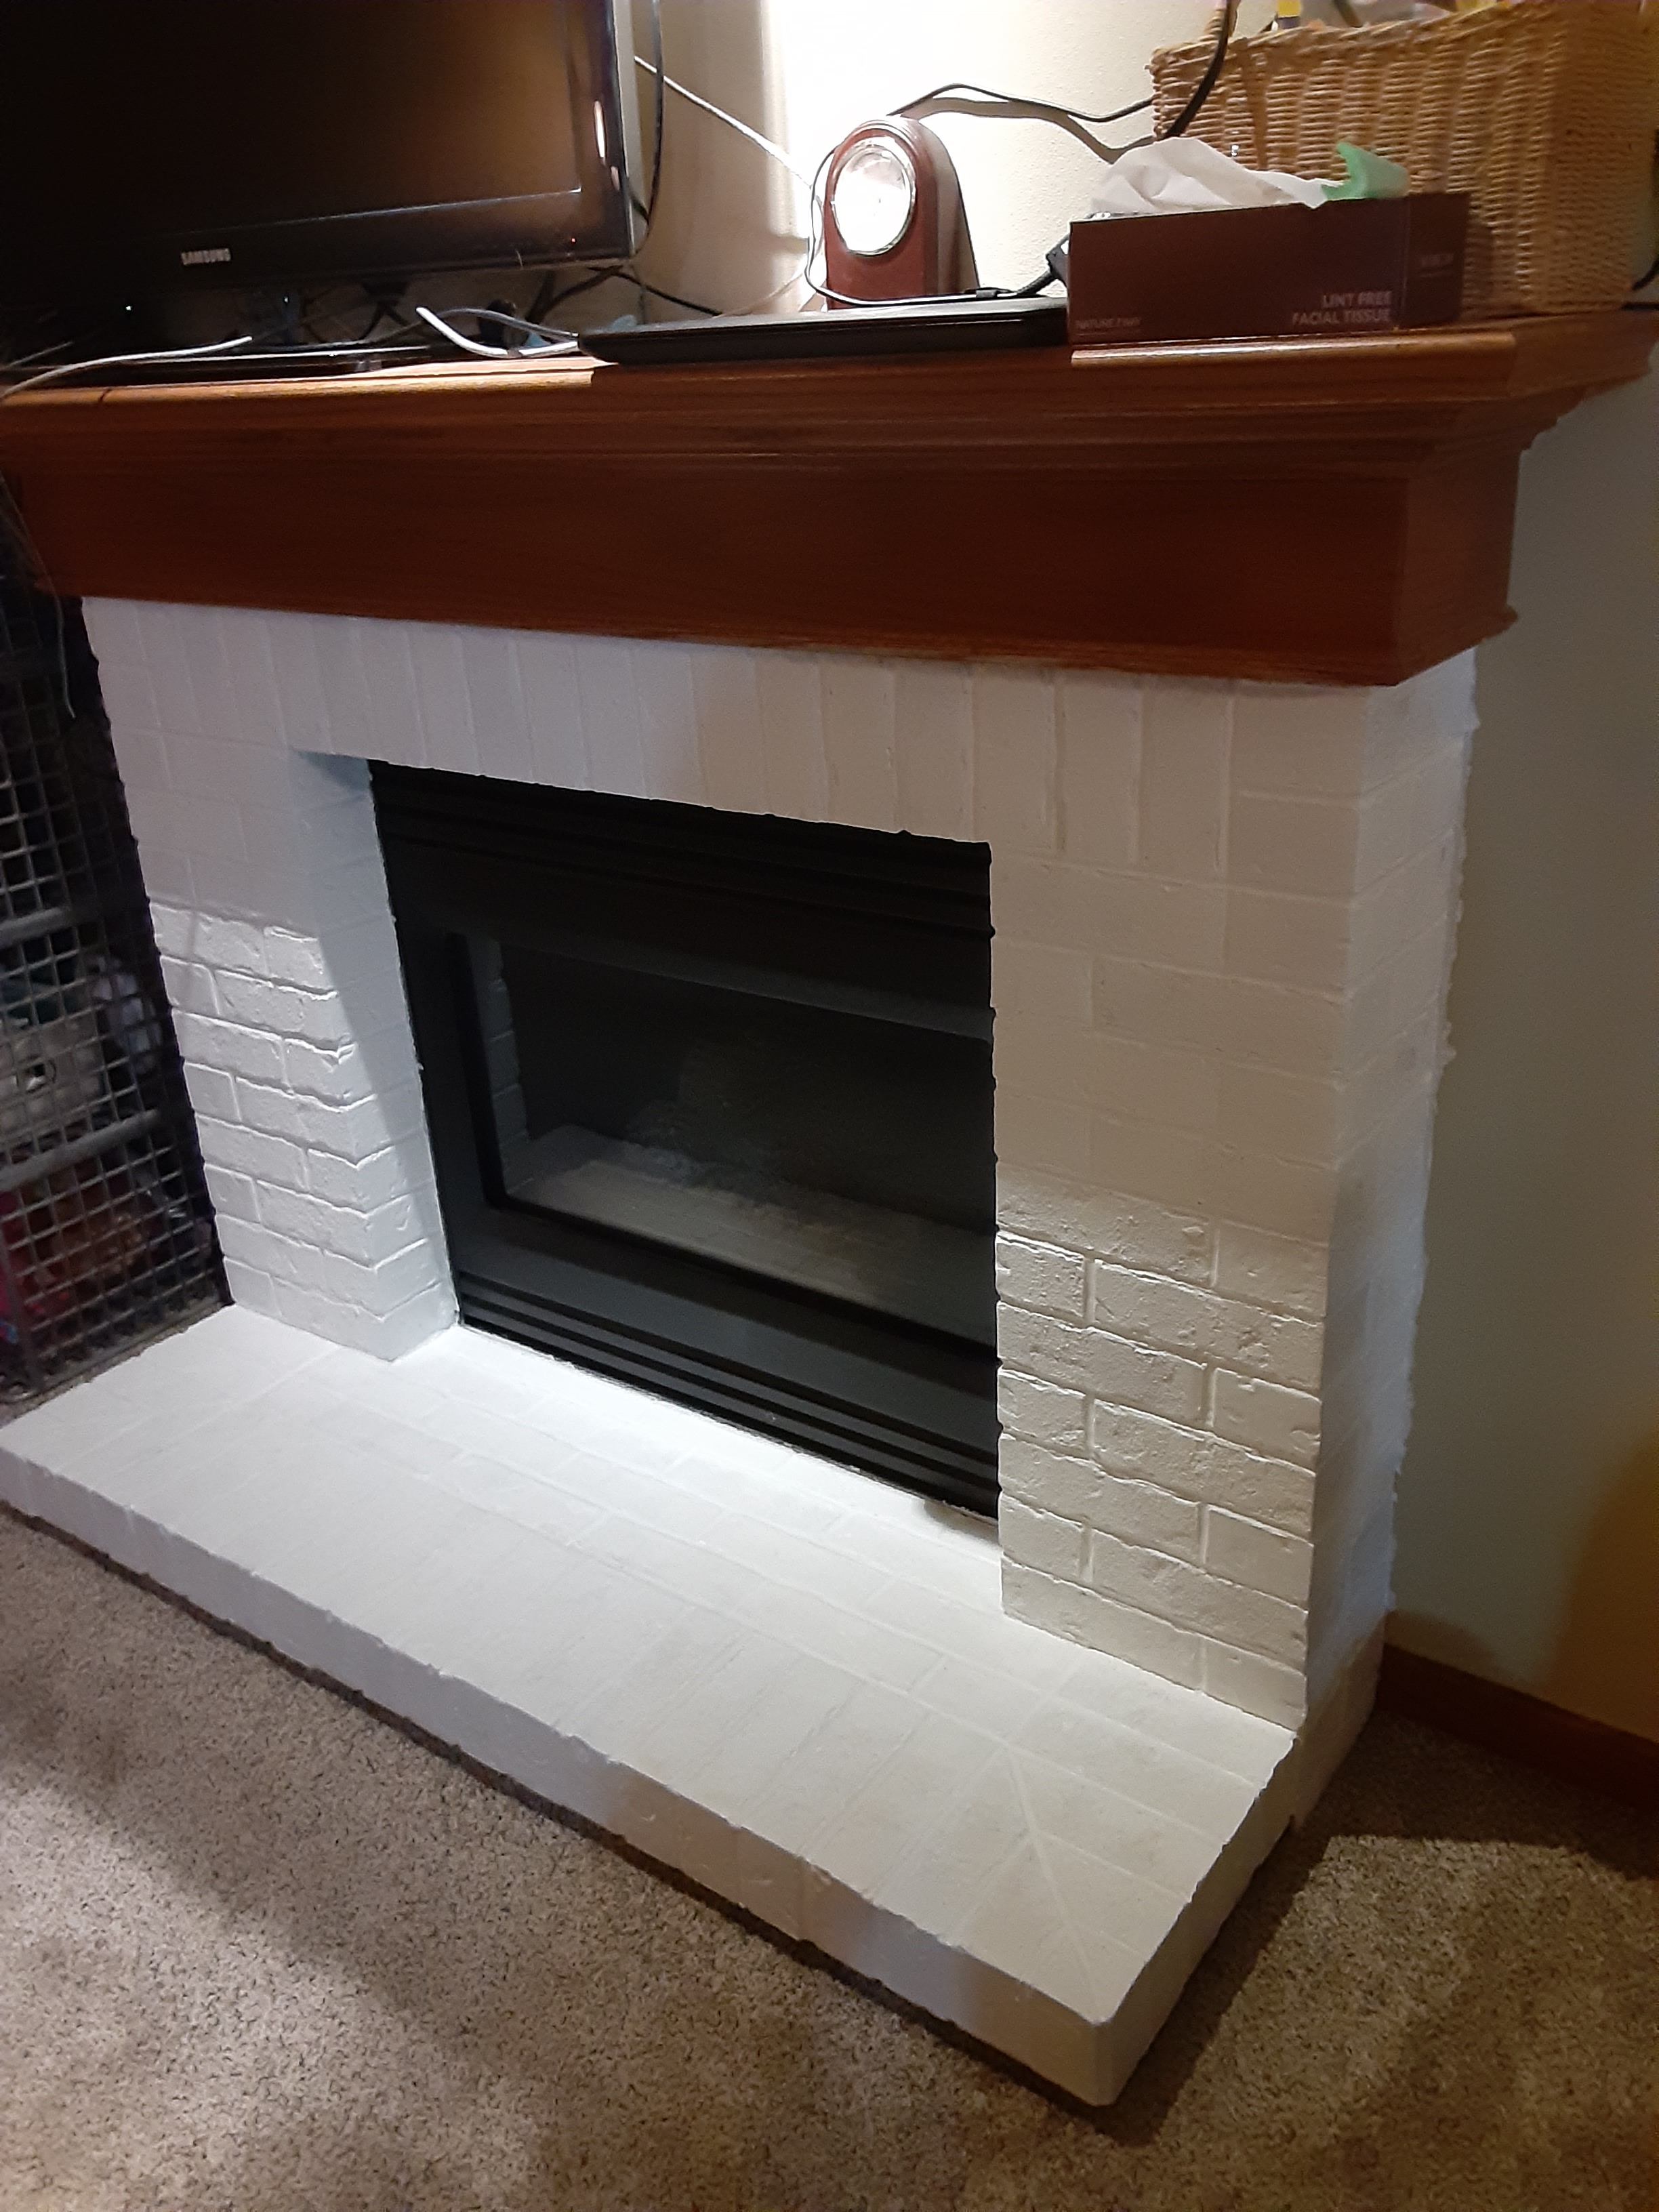 How to whitewash a1990’s brown brick fireplace